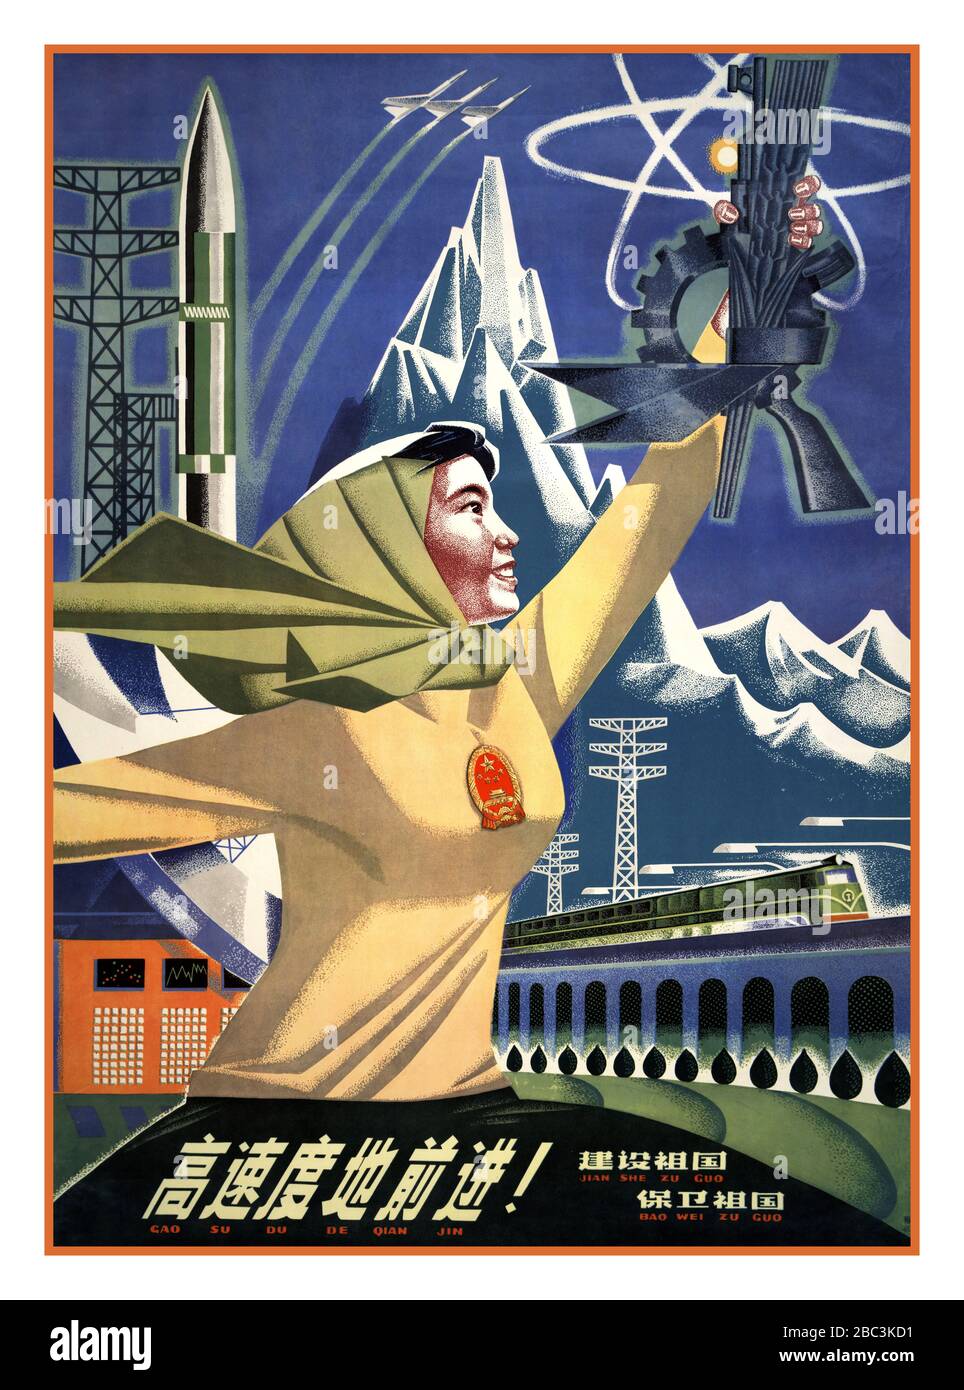 Archive 1970s China Economy Chinese Propaganda Poster 'Advance swiftly! Build the motherland Protect the motherland' China, under leader Deng Xiaoping Communist Party Cultural Revolution end 1978 Economic reforms and economic revolution Economy and Industrial Boom Stock Photo